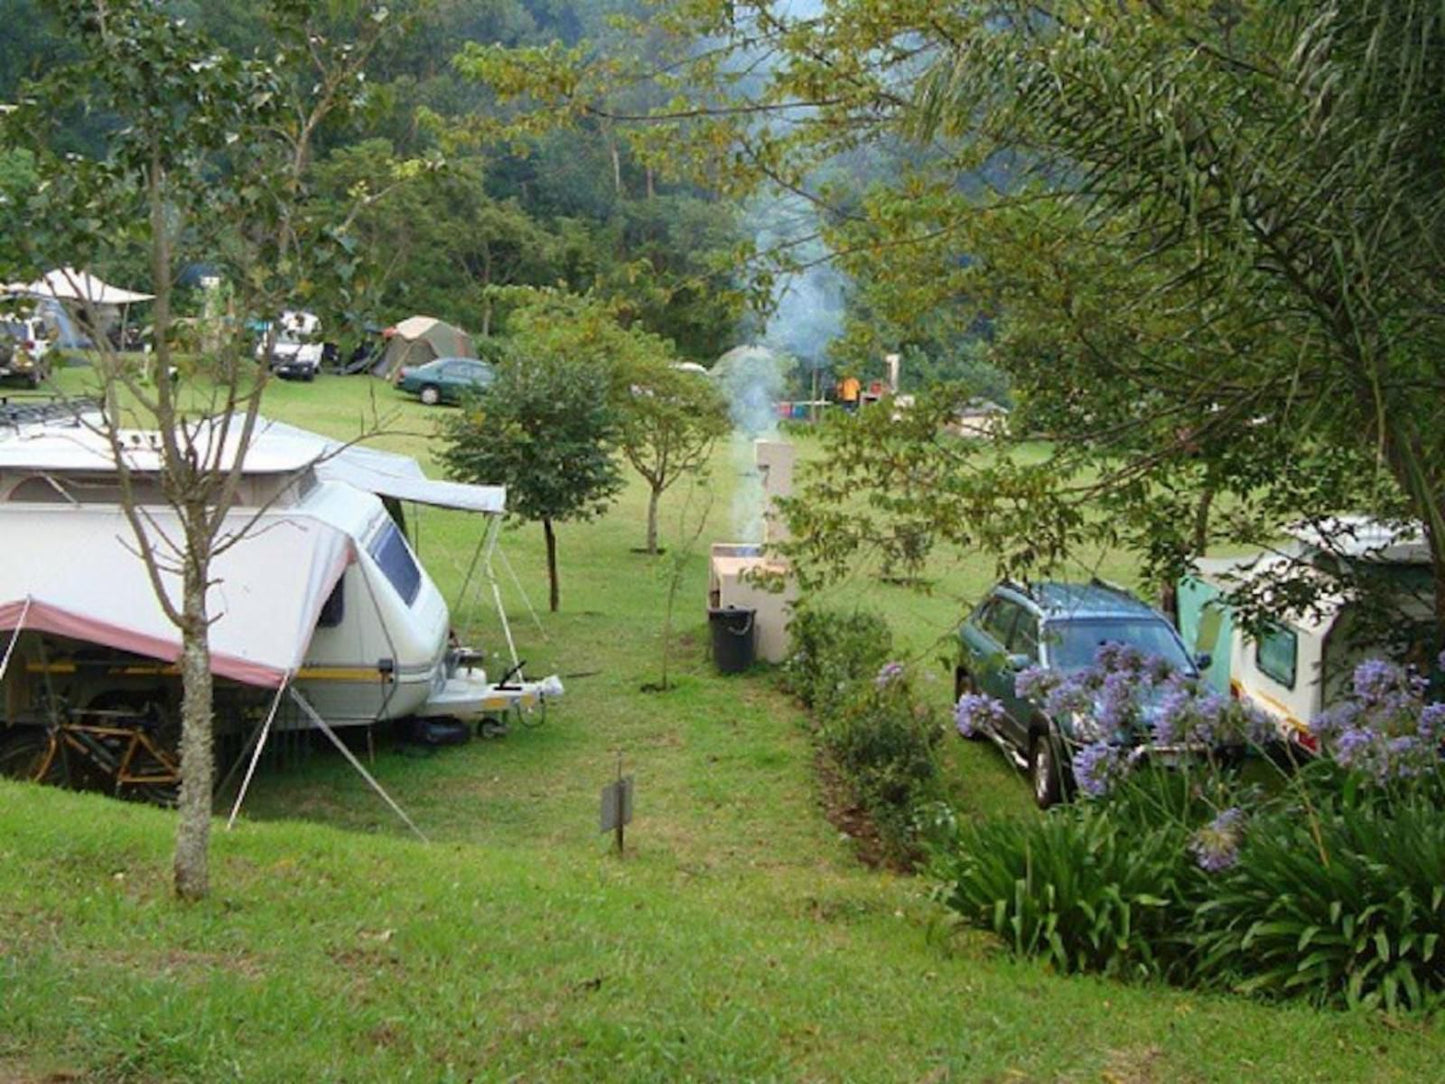 Magoebaskloof Camping Sites Magoebaskloof Limpopo Province South Africa Tent, Architecture